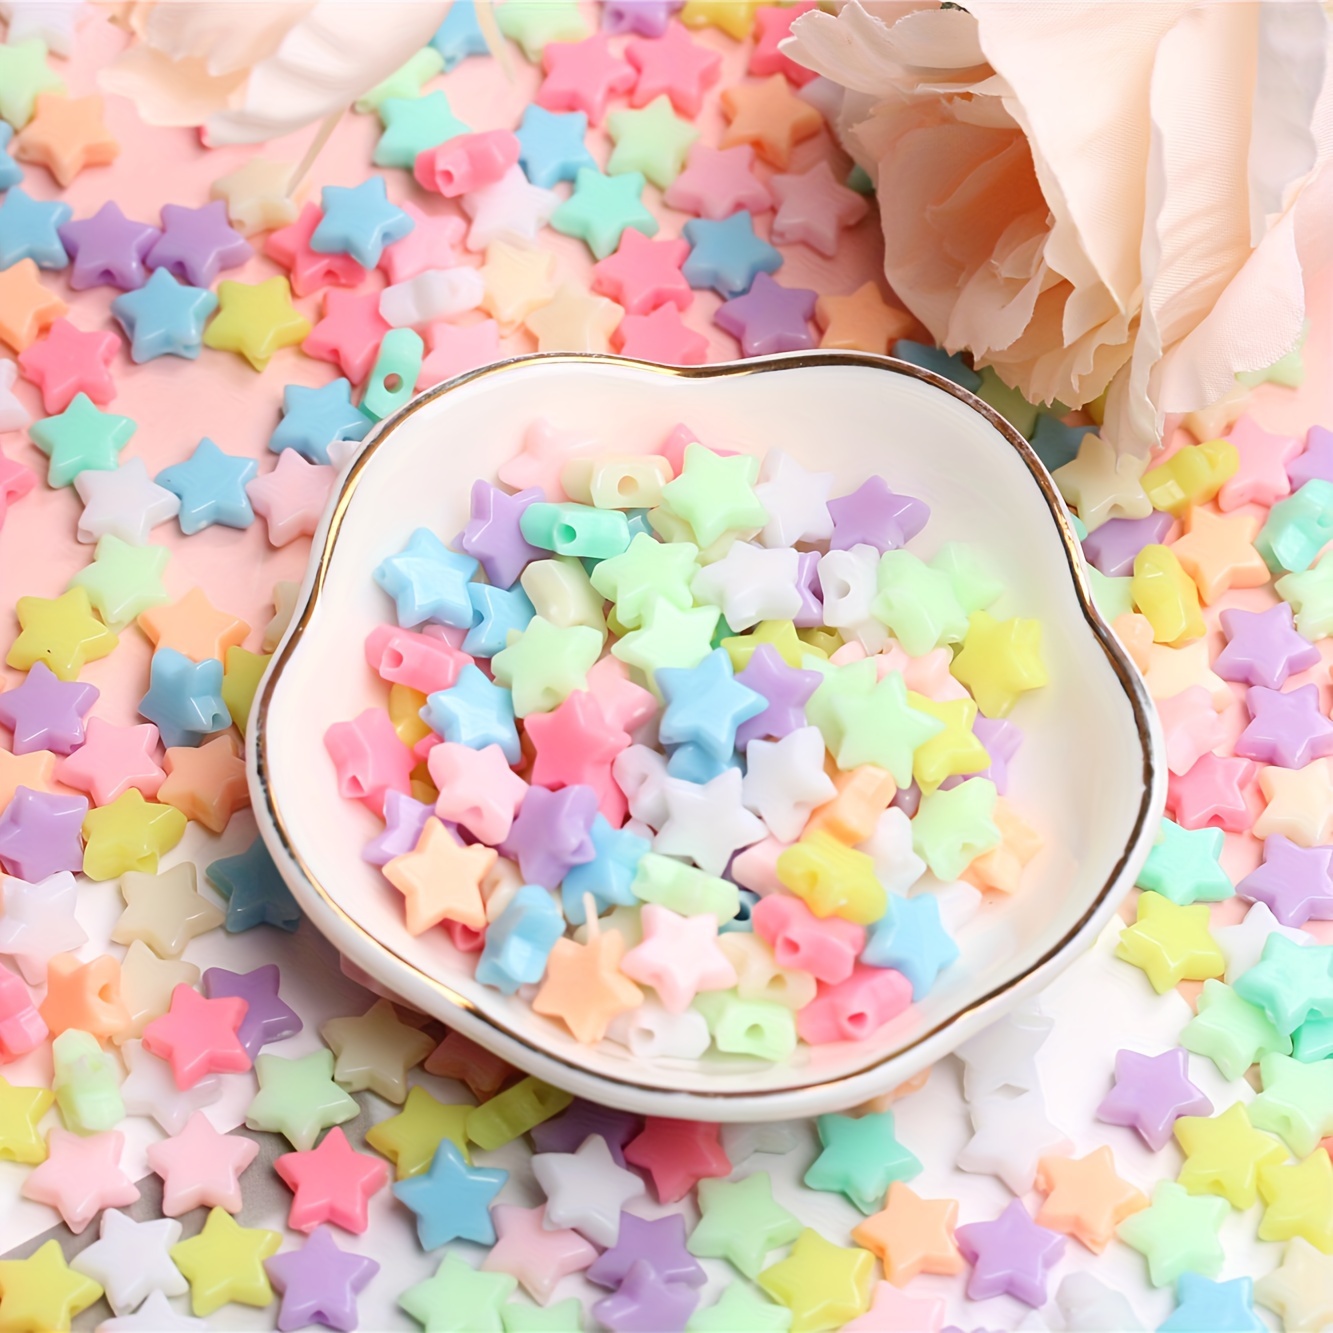 

400 Pcs 10mm Acrylic Acrylic Star Beads, Spring Candy Color For Diy Handmade Bracelets And Necklaces, Educational Craft Beads For Intelligence Development